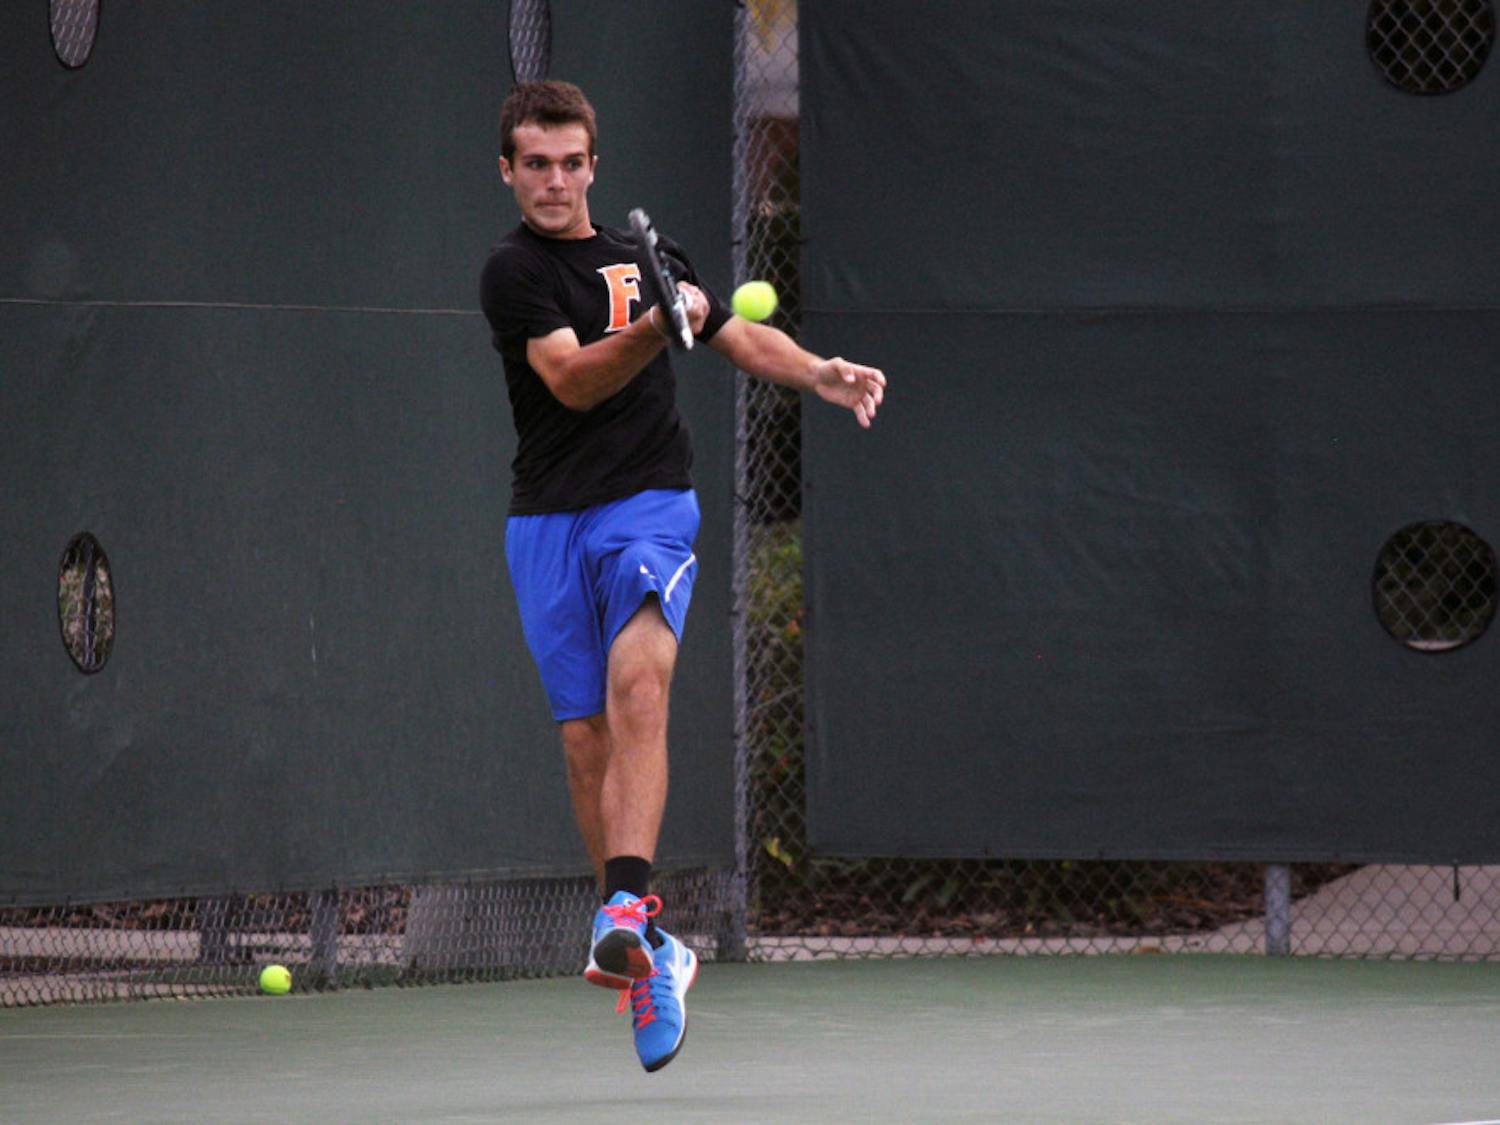 Chase Perez-Blanco returns a ball during Florida's 4-1 win against Mississippi State on March 13 at the Ring Tennis Complex.